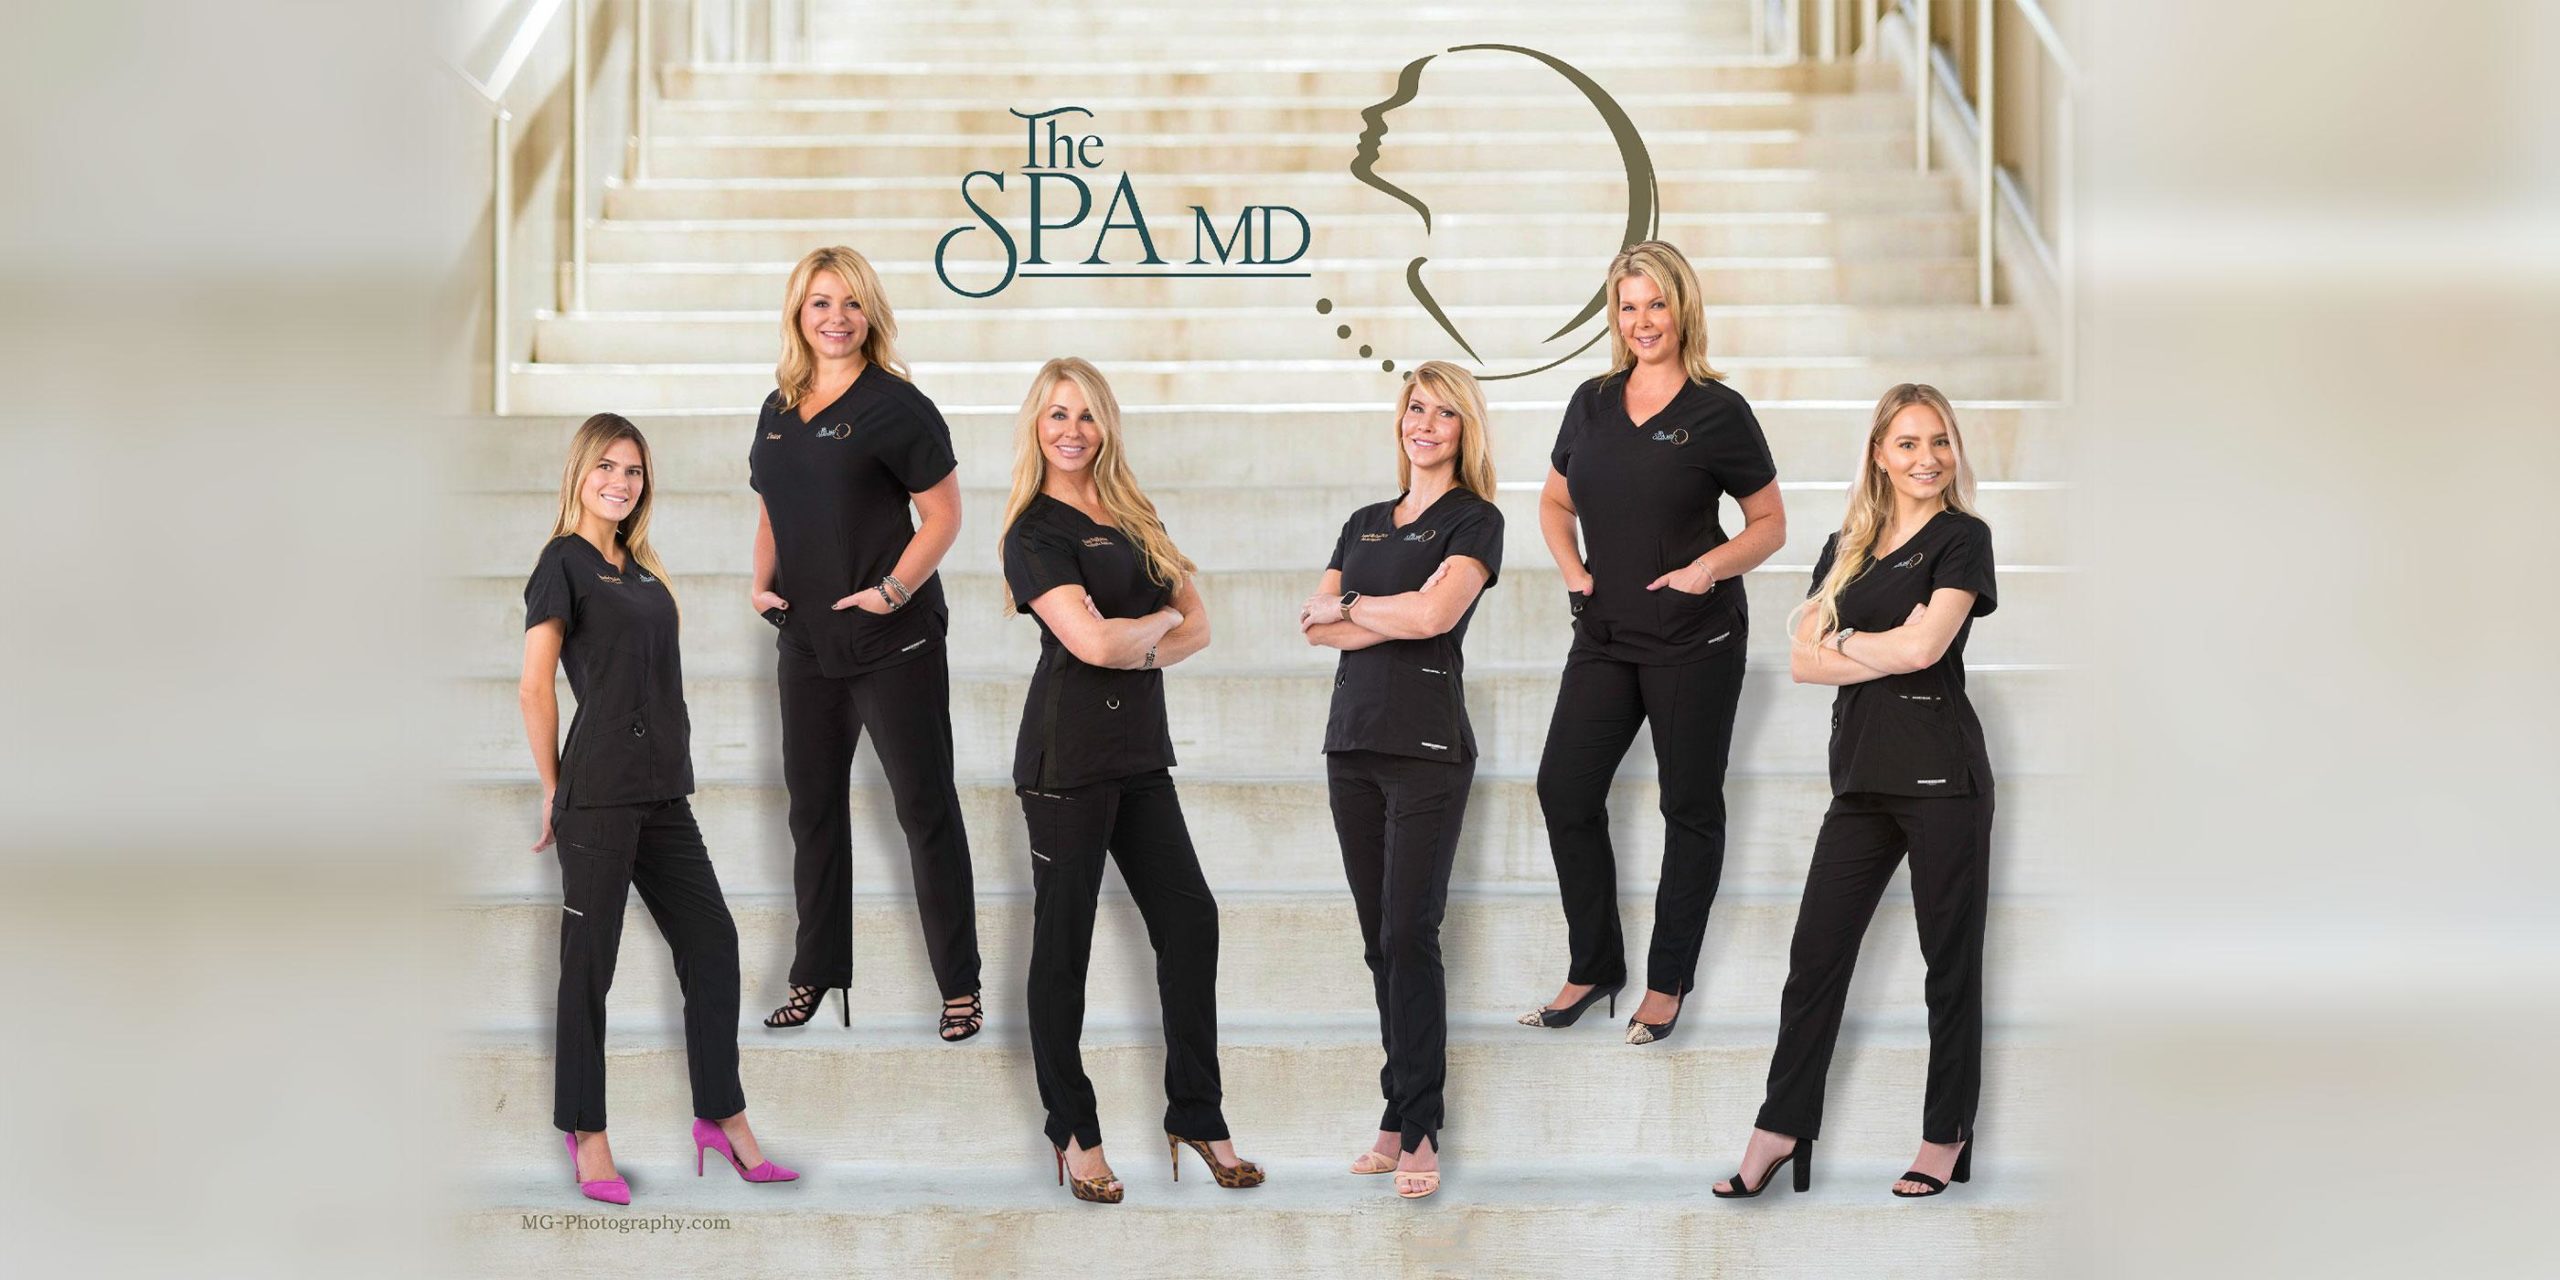 Meet The Professional Staff Team | The Spa MD In Rochester Hills, MI